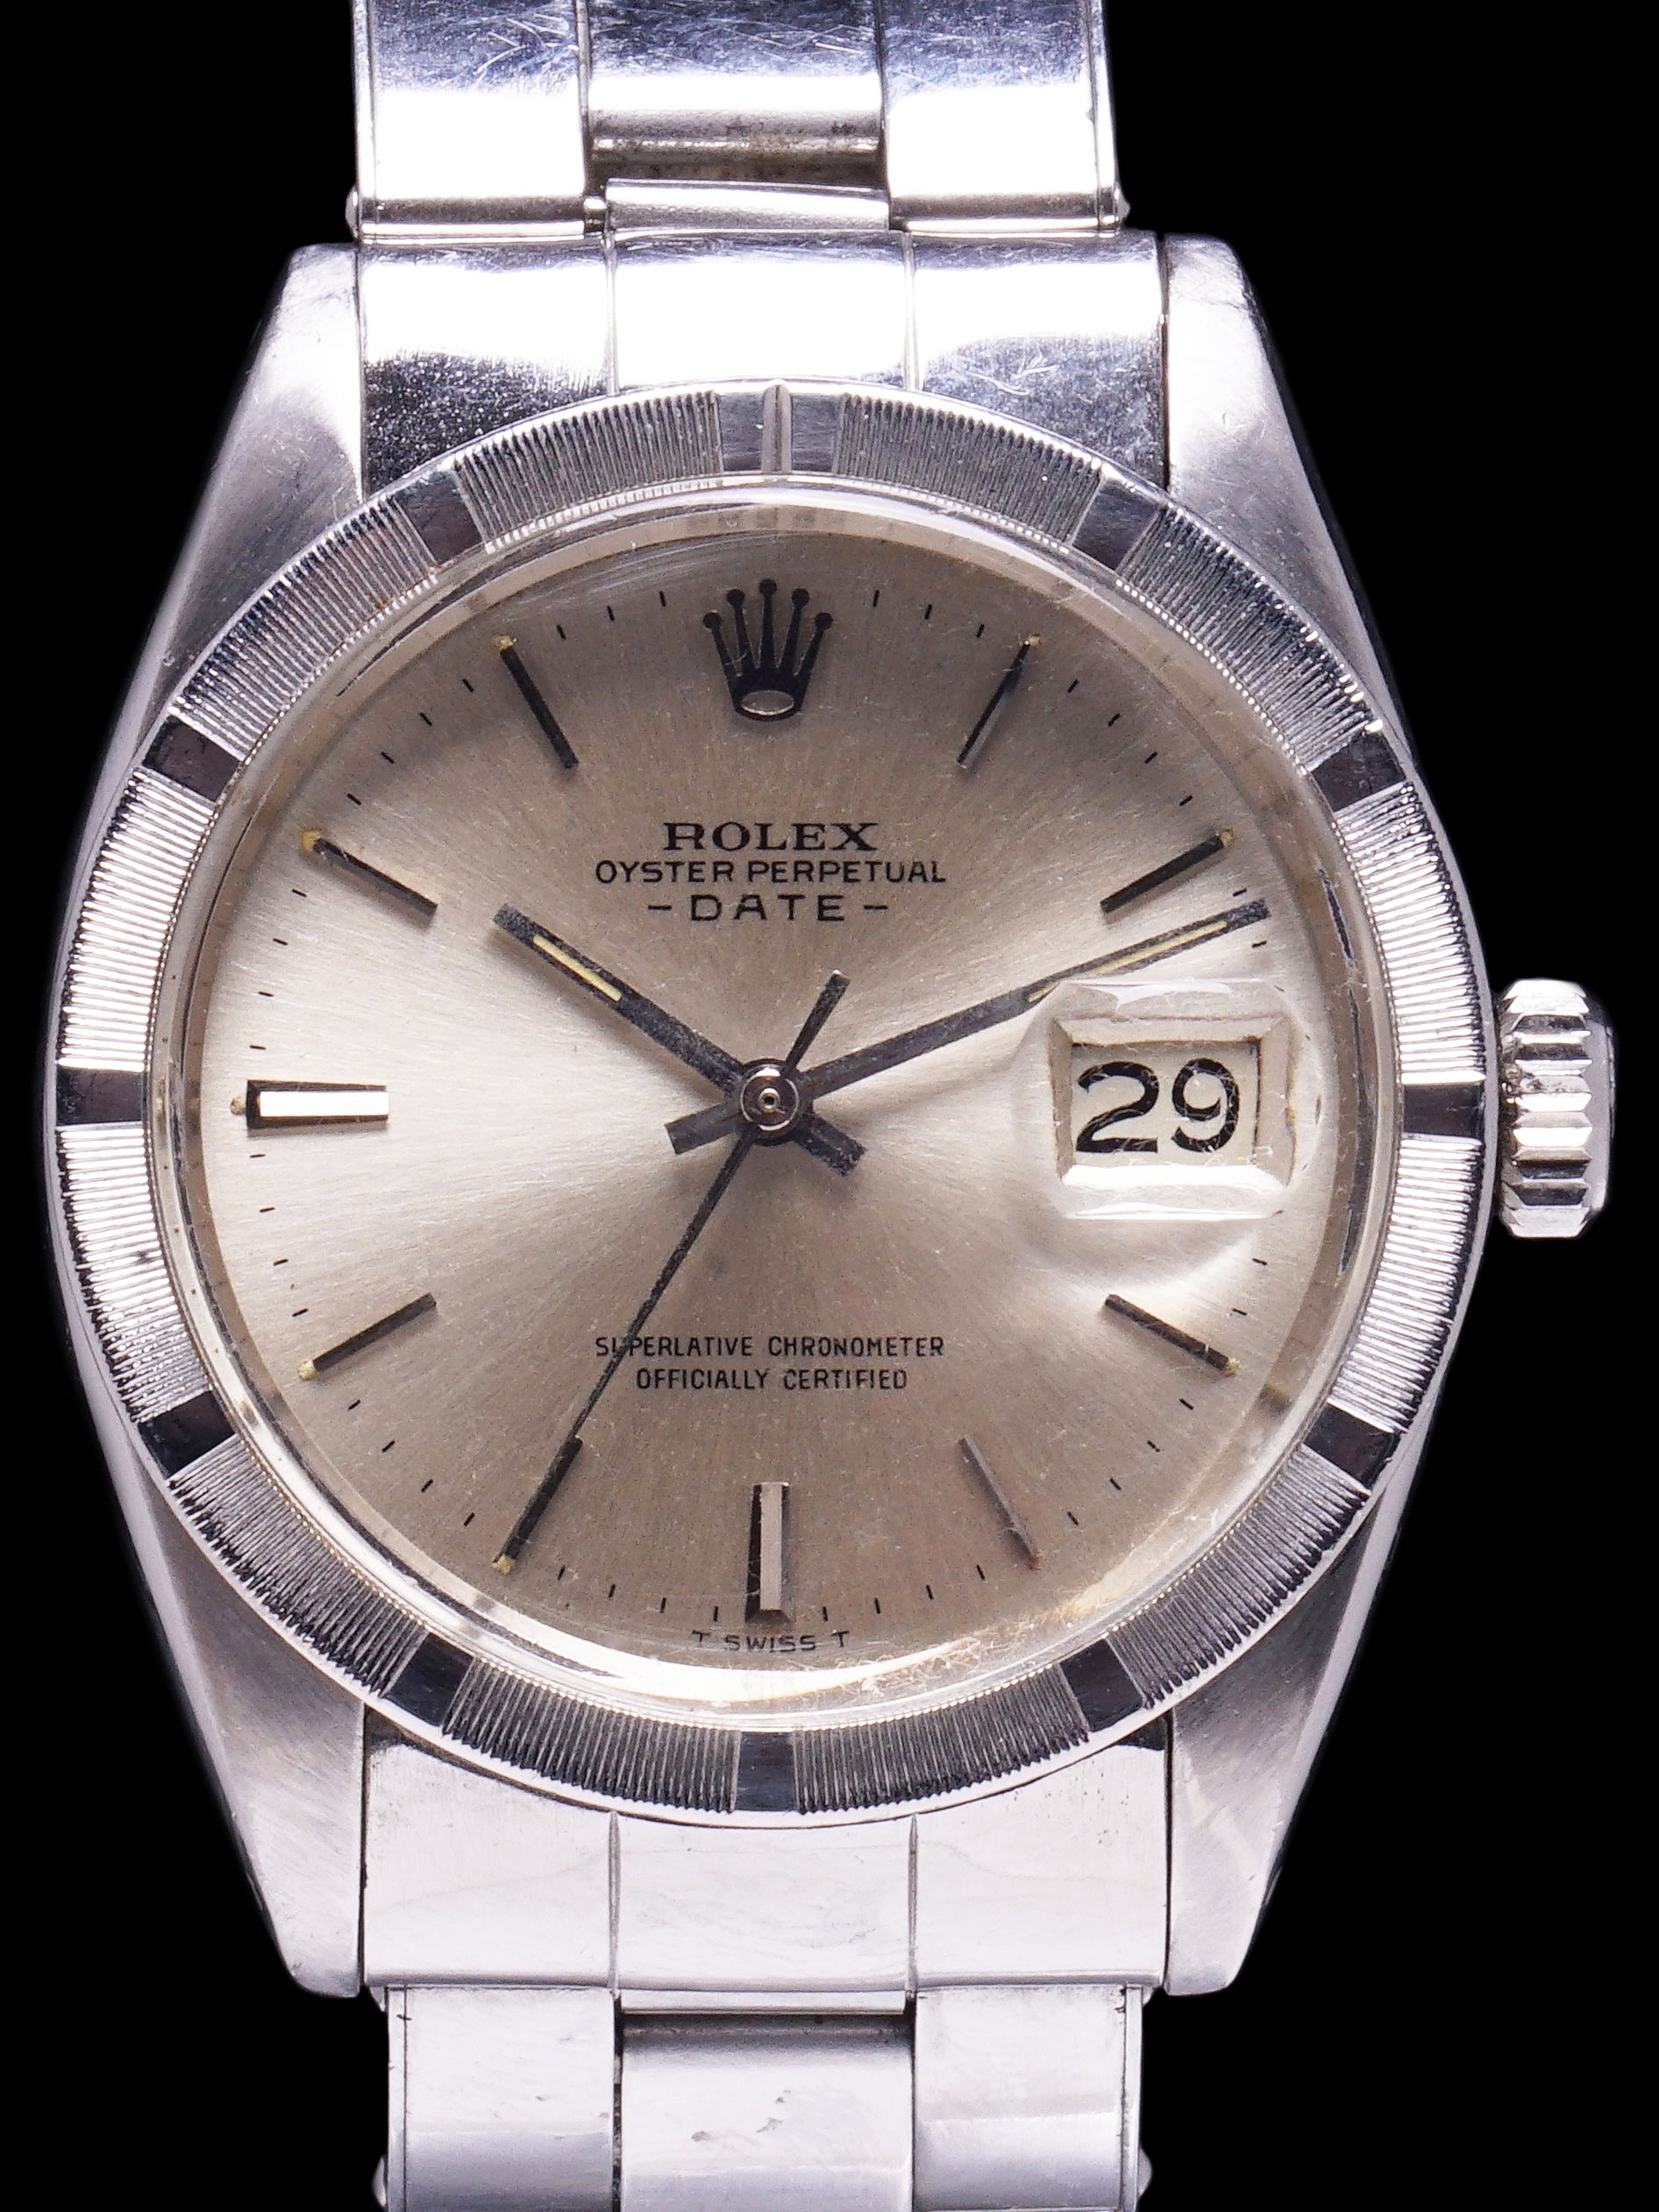 1966 Rolex Oyster-Perpetual Date (Ref. 1501) With Box and Double Punched Papers - Saigon Special